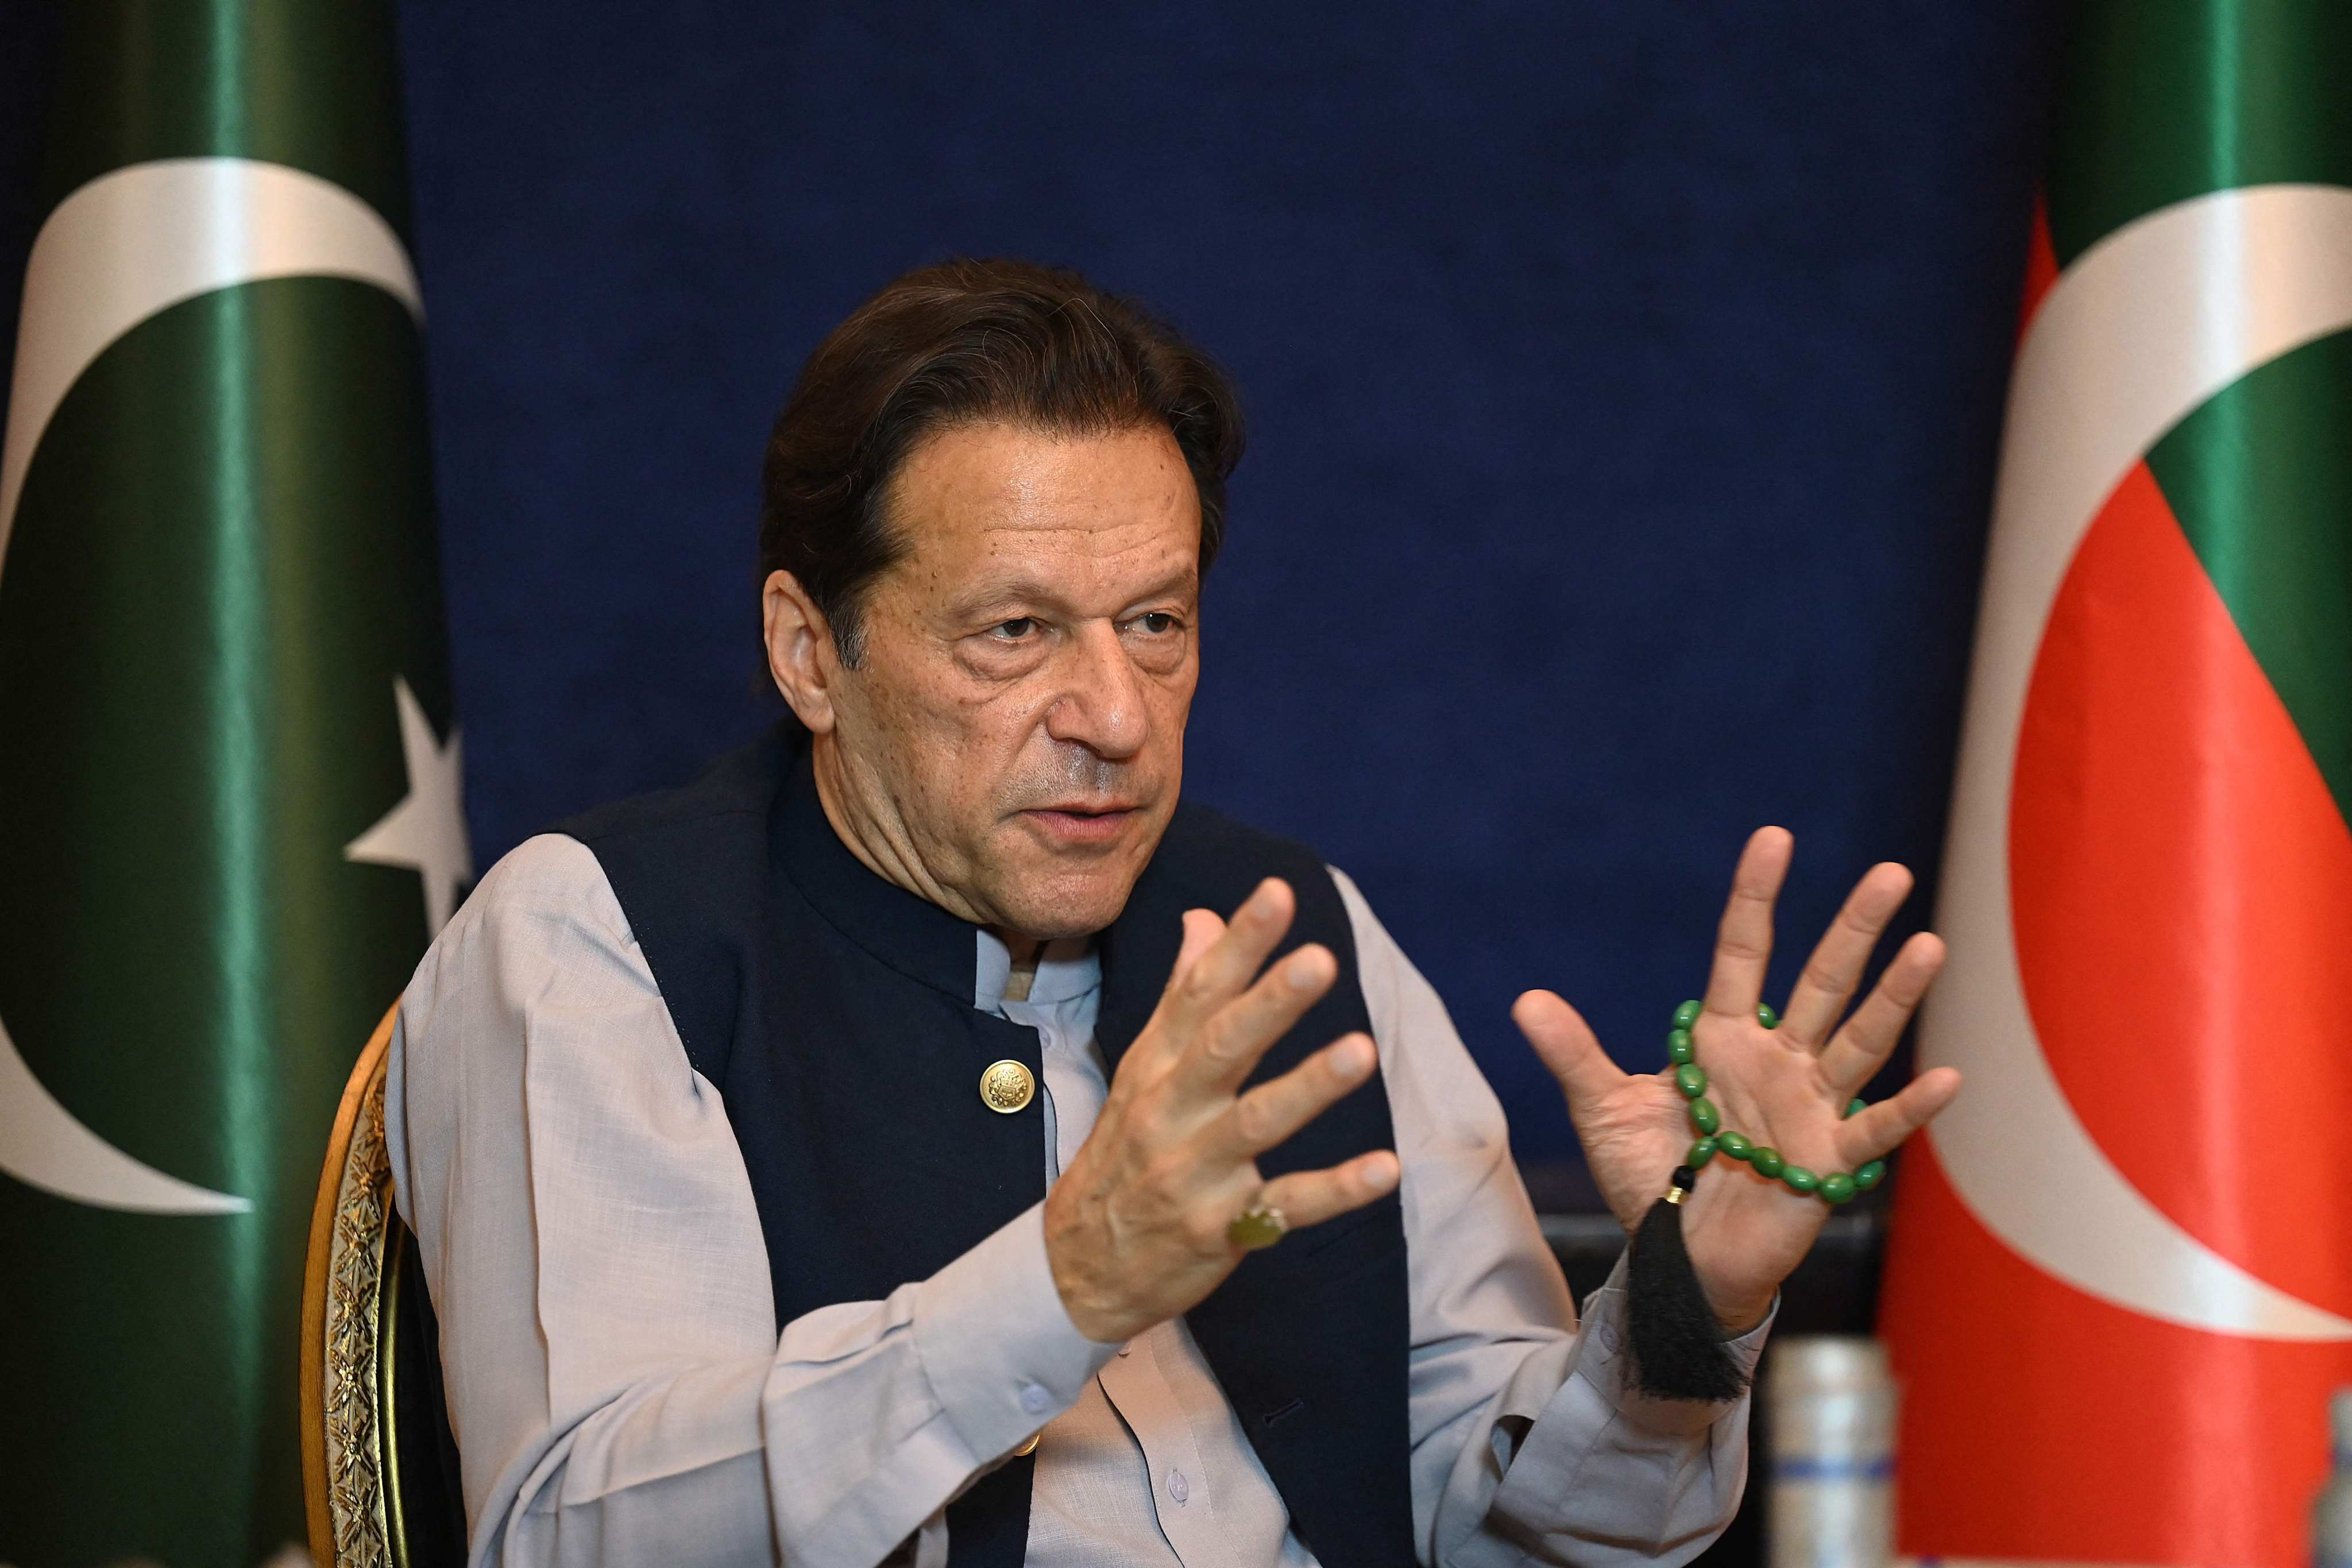 A Pakistan court handed former Prime Minister Imran Khan a 10-year jail term on Tuesday for leaking state secrets. Photo: AFP